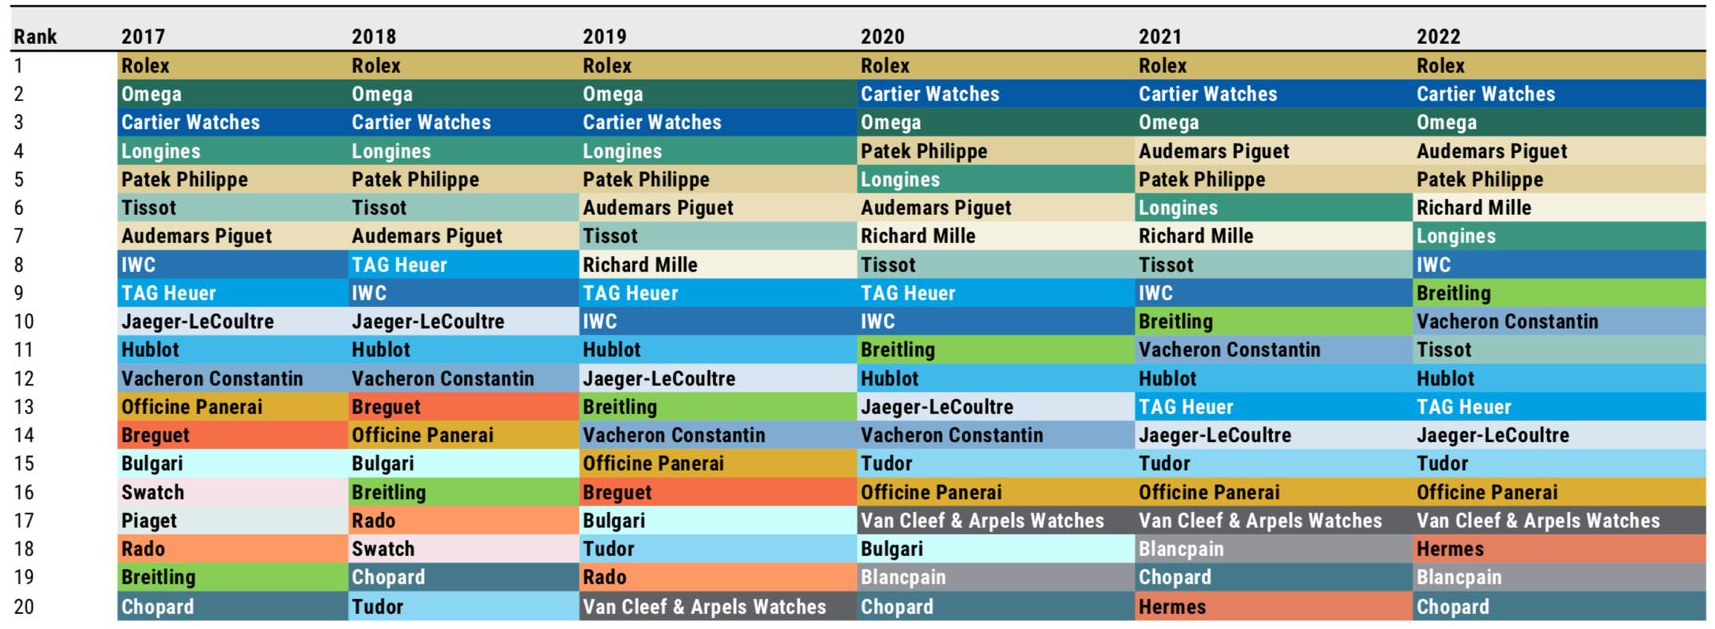 Morgan Stanley Top 20 Swiss Watch Brands from 2017 to 2023